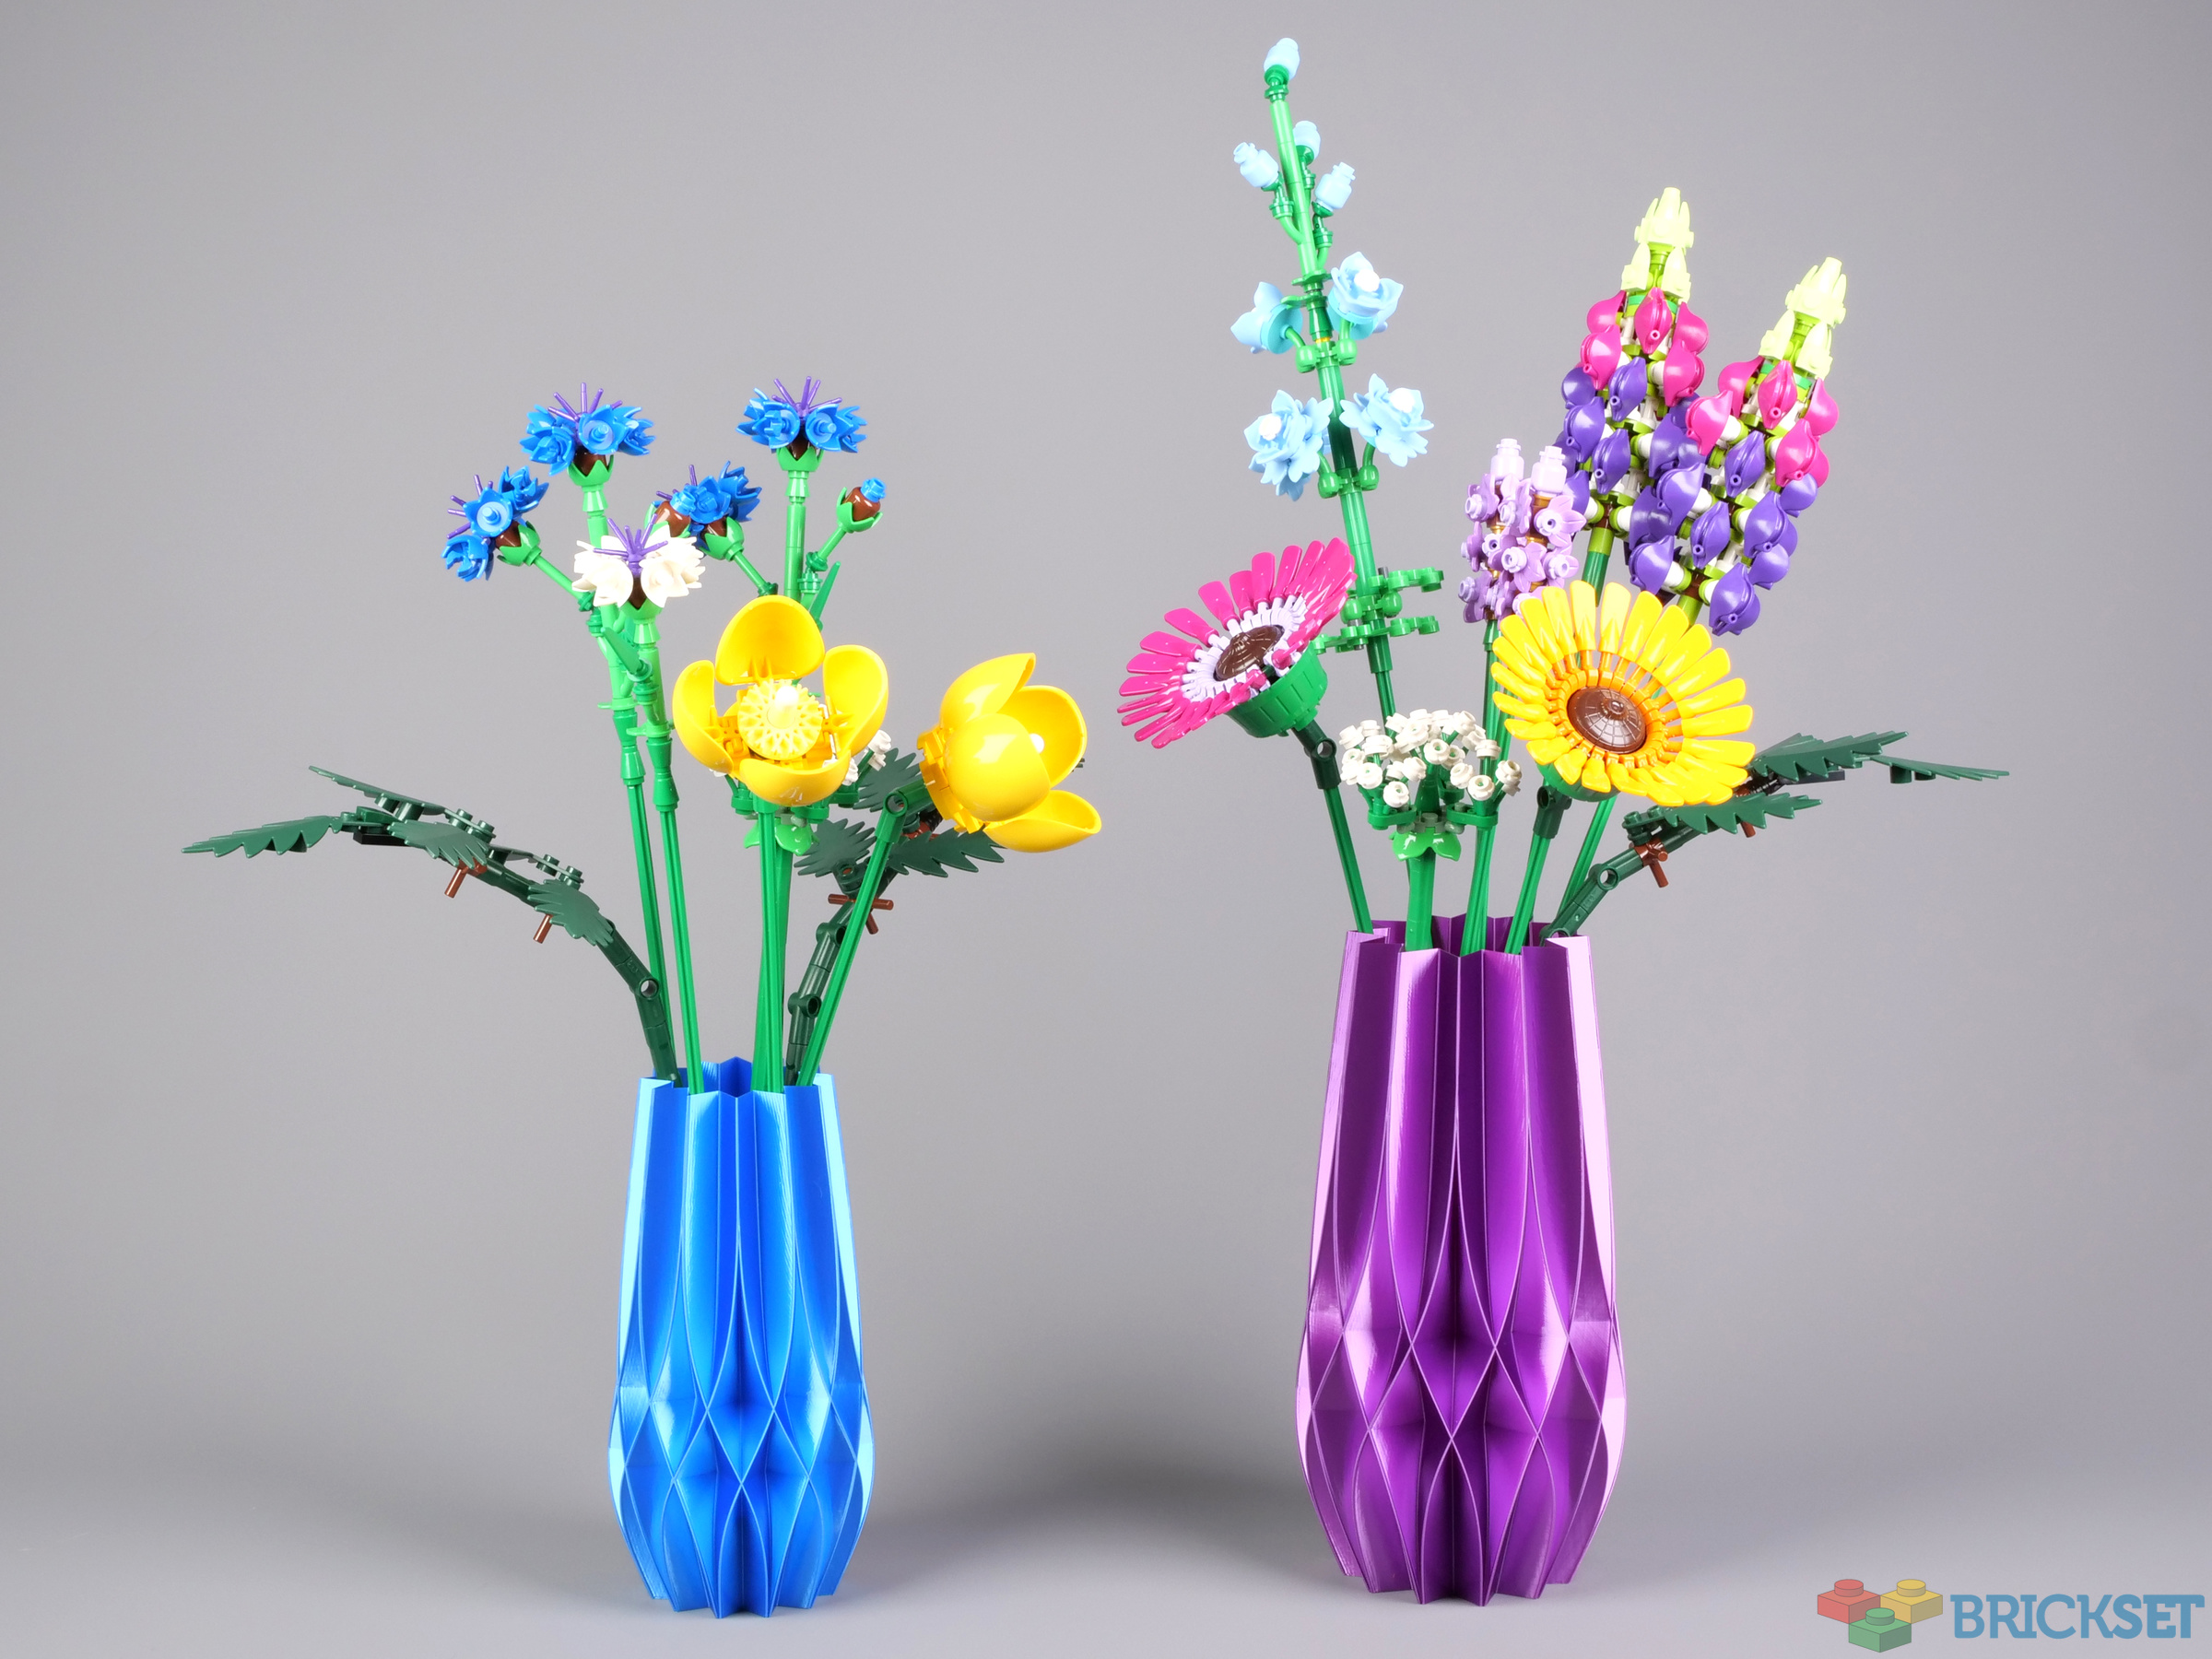 LEGO 10313 Wildflower Bouquet review